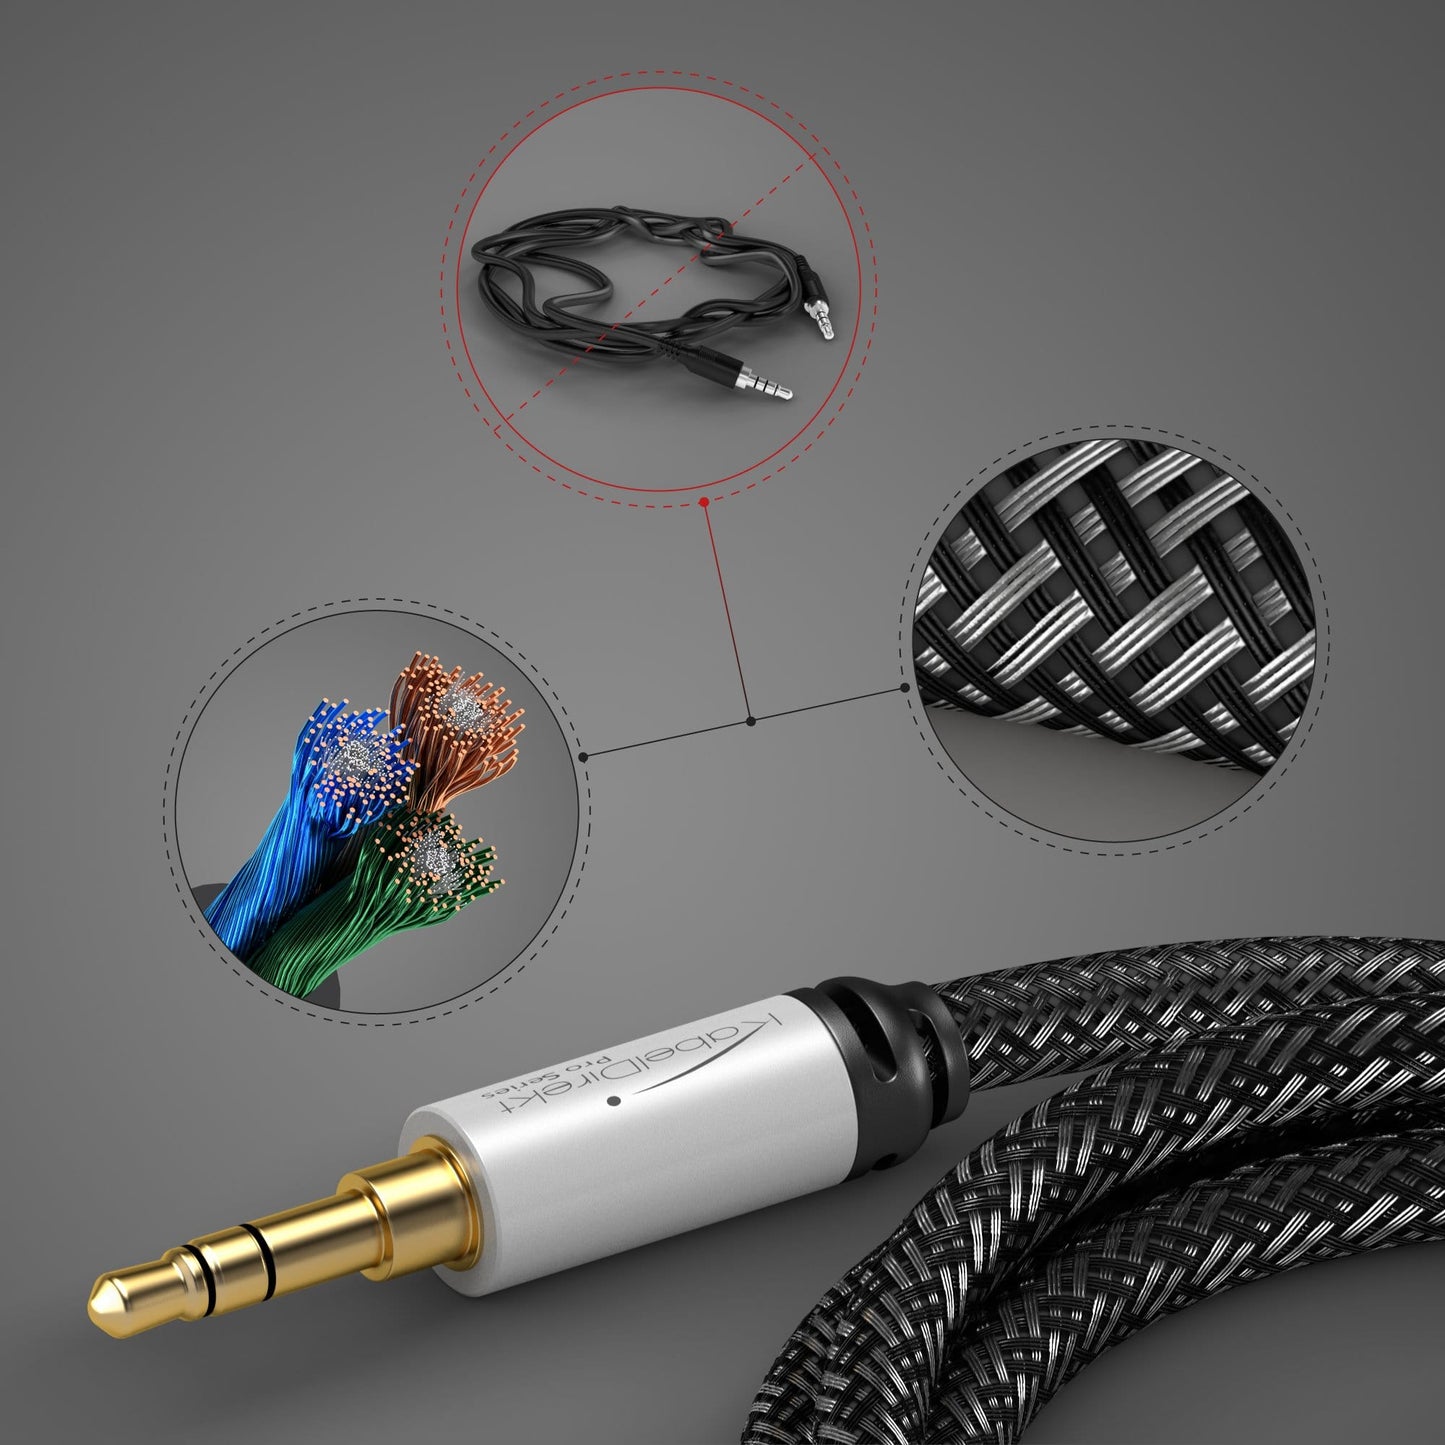 AUX audio & jack cable - designed to be indestructible & ideally suited for iPhones, iPads, smartphones, cars - silver